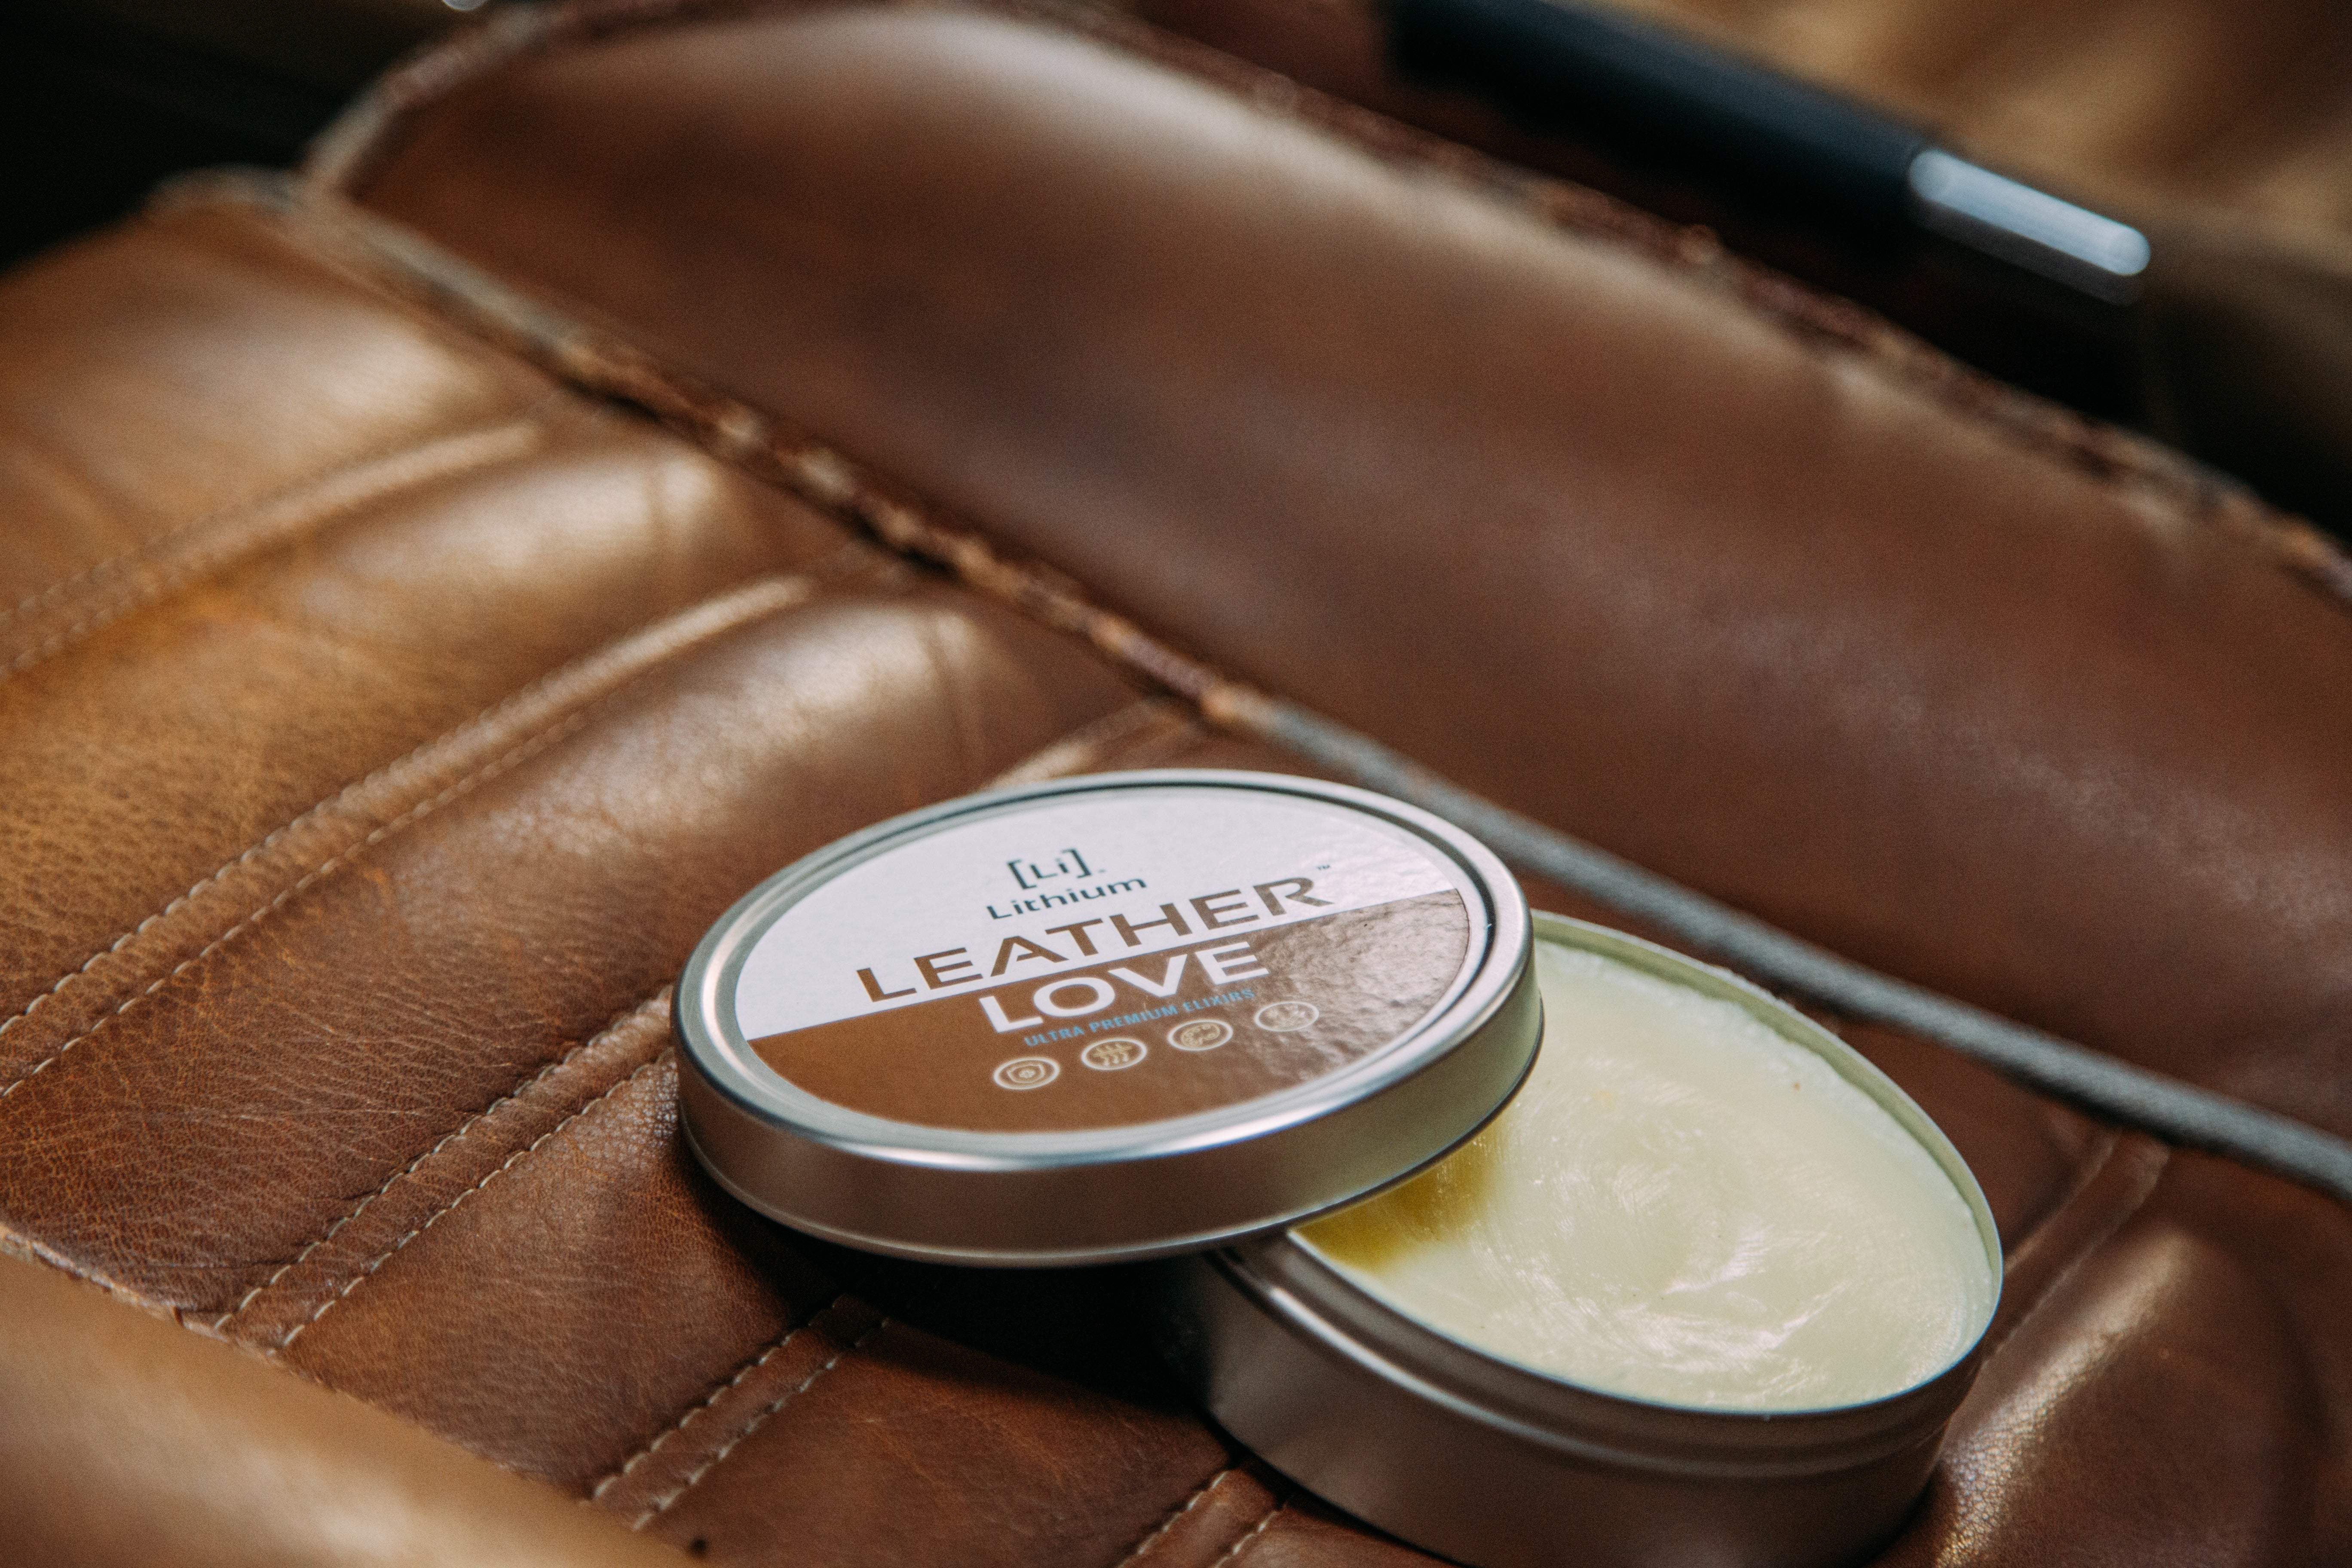 An open can of 'Leather Love' leather conditioner resting on rich, antique brown leather car seats, ready for application